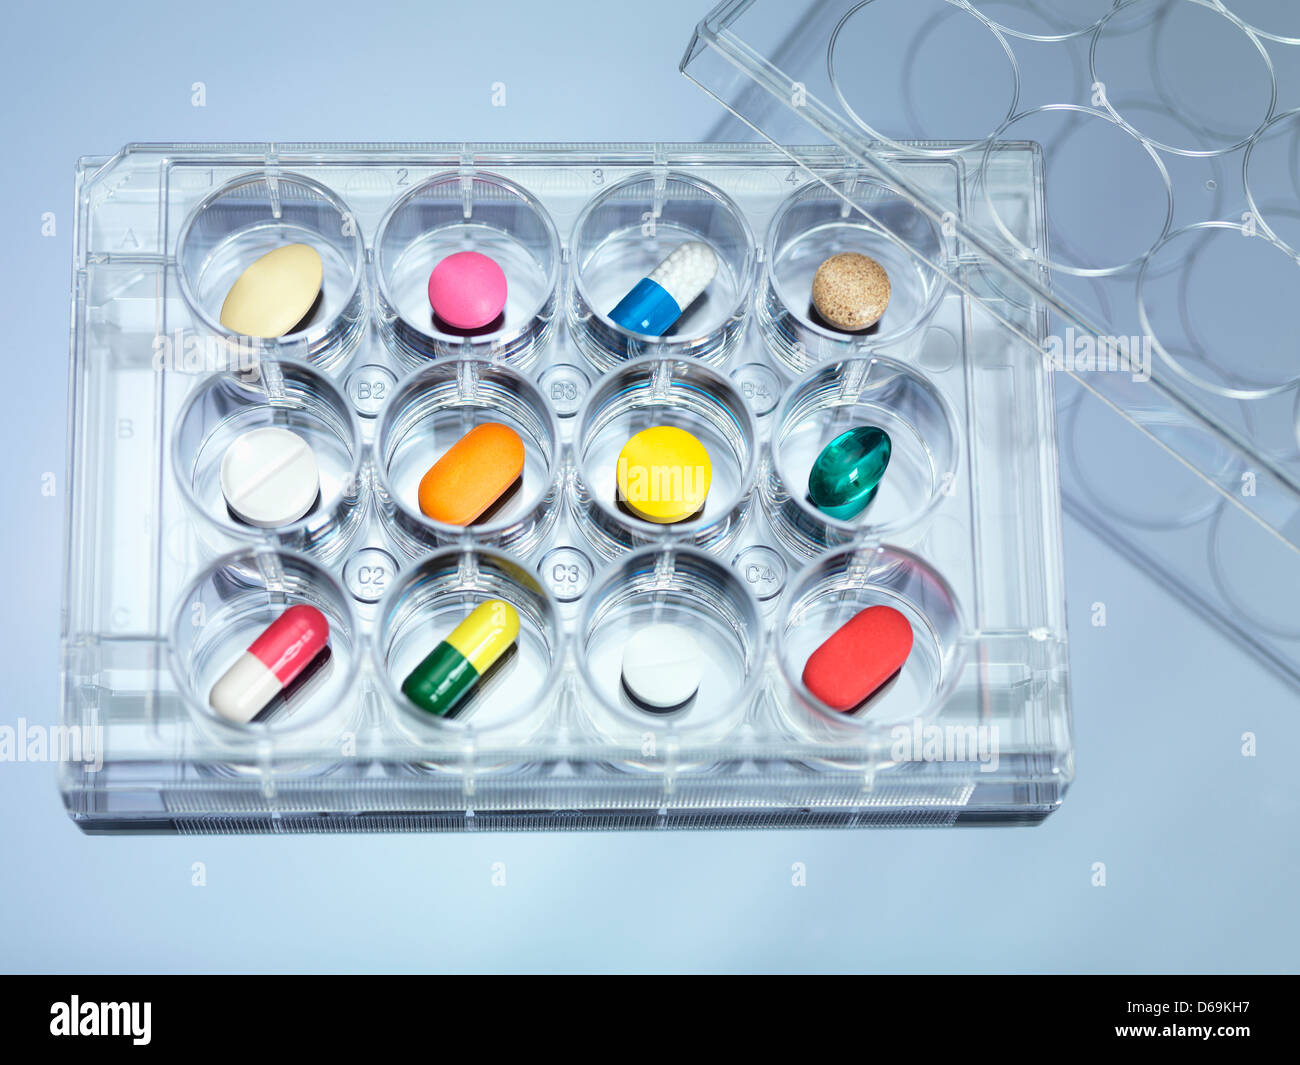 A variety of drugs sitting in a multi well sample tray Illustrating drug clinical trial Stock Photo